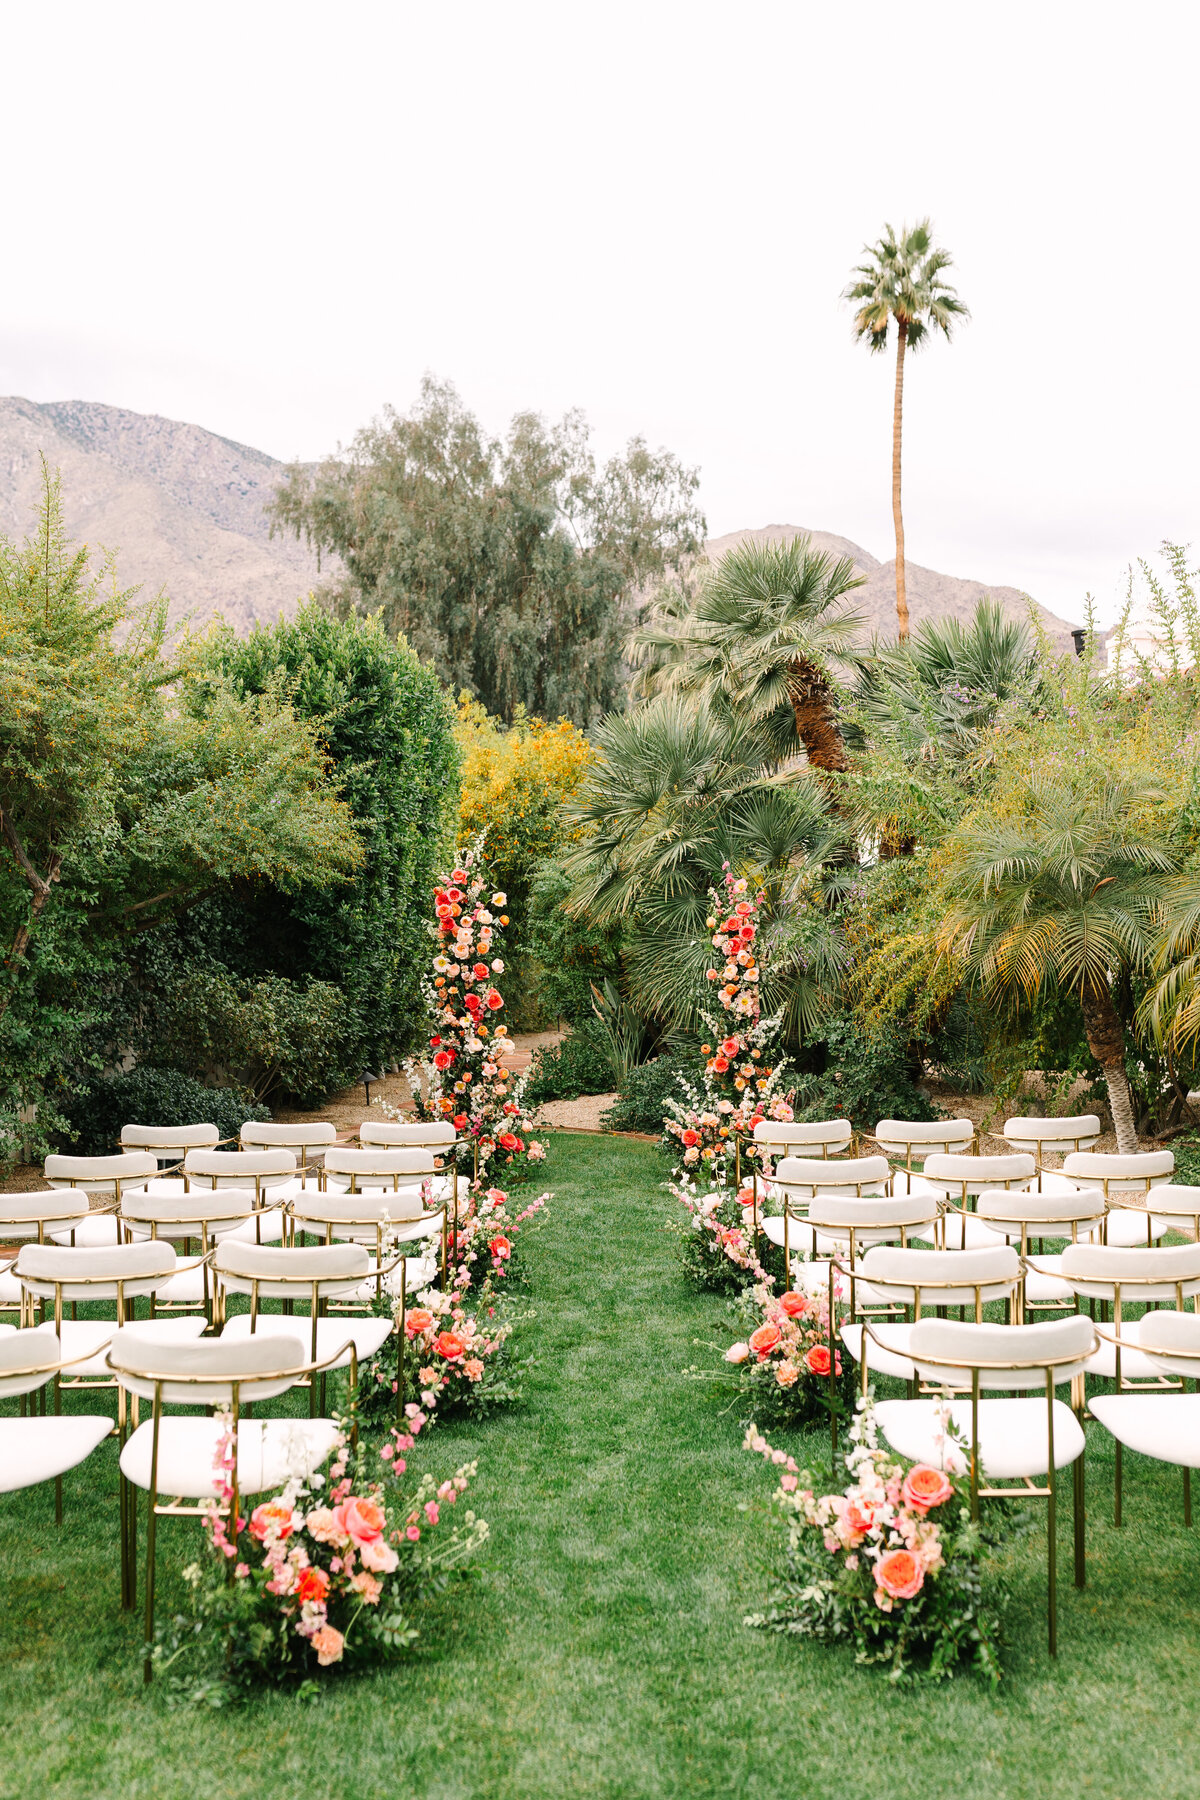 sonoma wedding ceremony set-up with white mid-century modern chairs and pink and orange florals with palm trees in background.